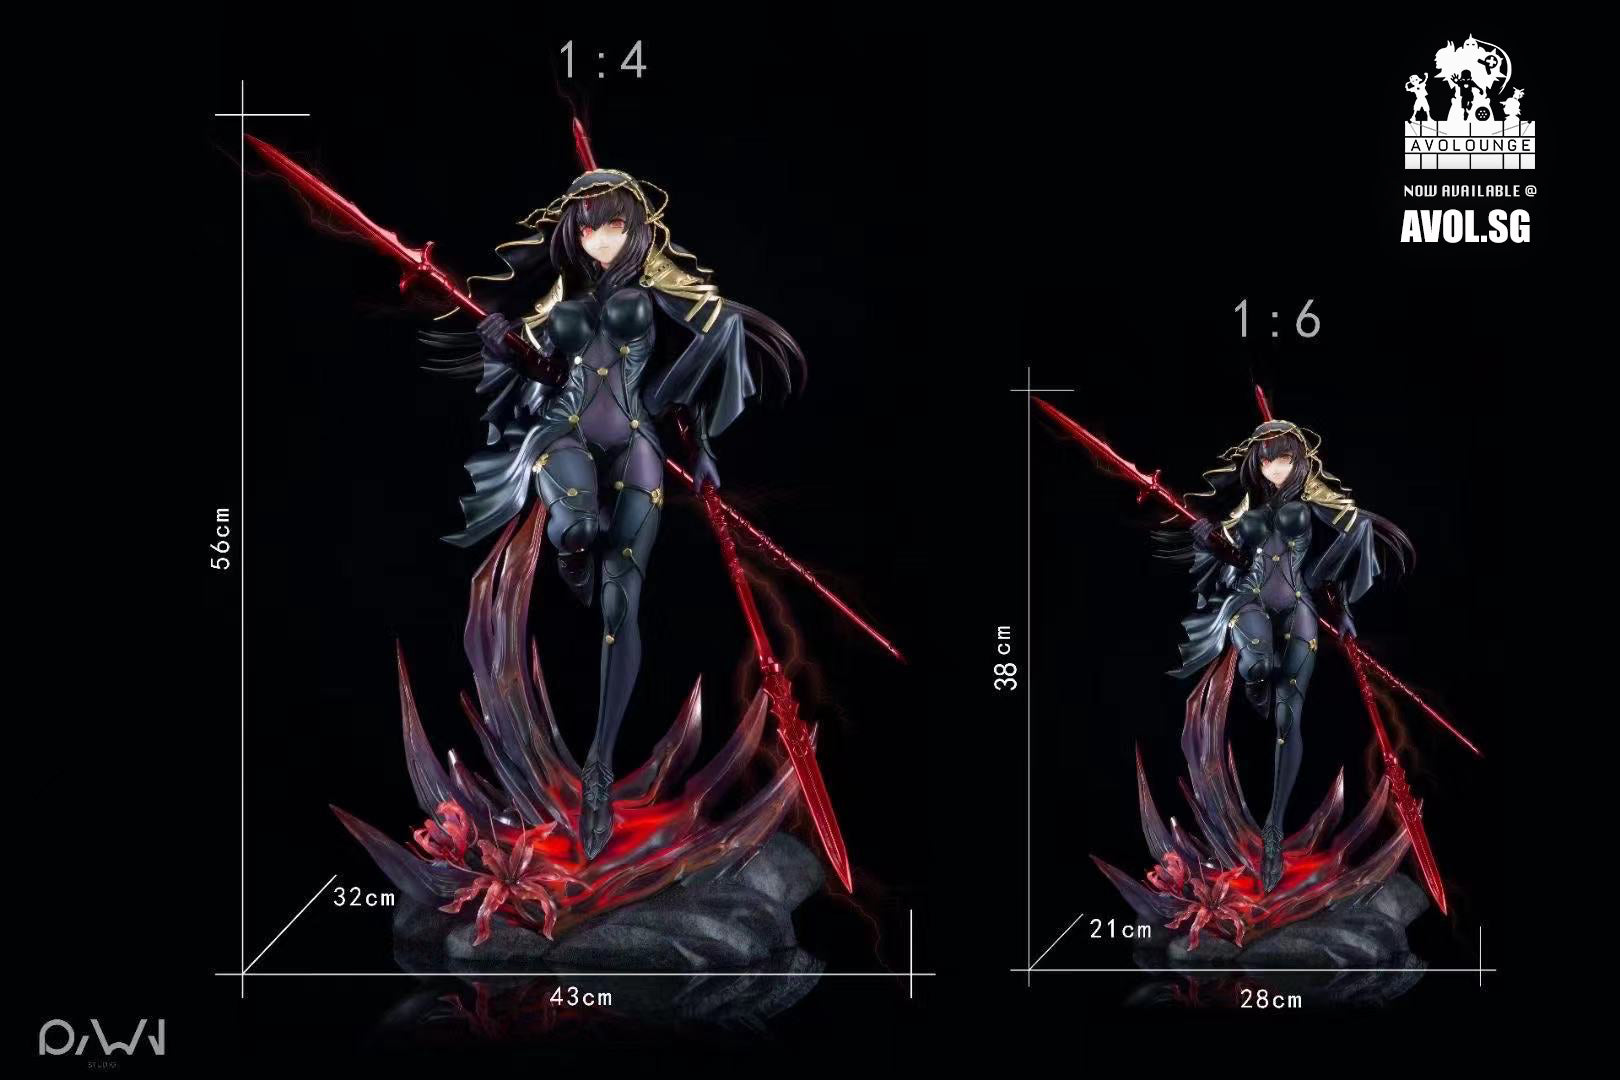 RWN Studio  - Scáthach [1/4 scale and 1l6 scale]